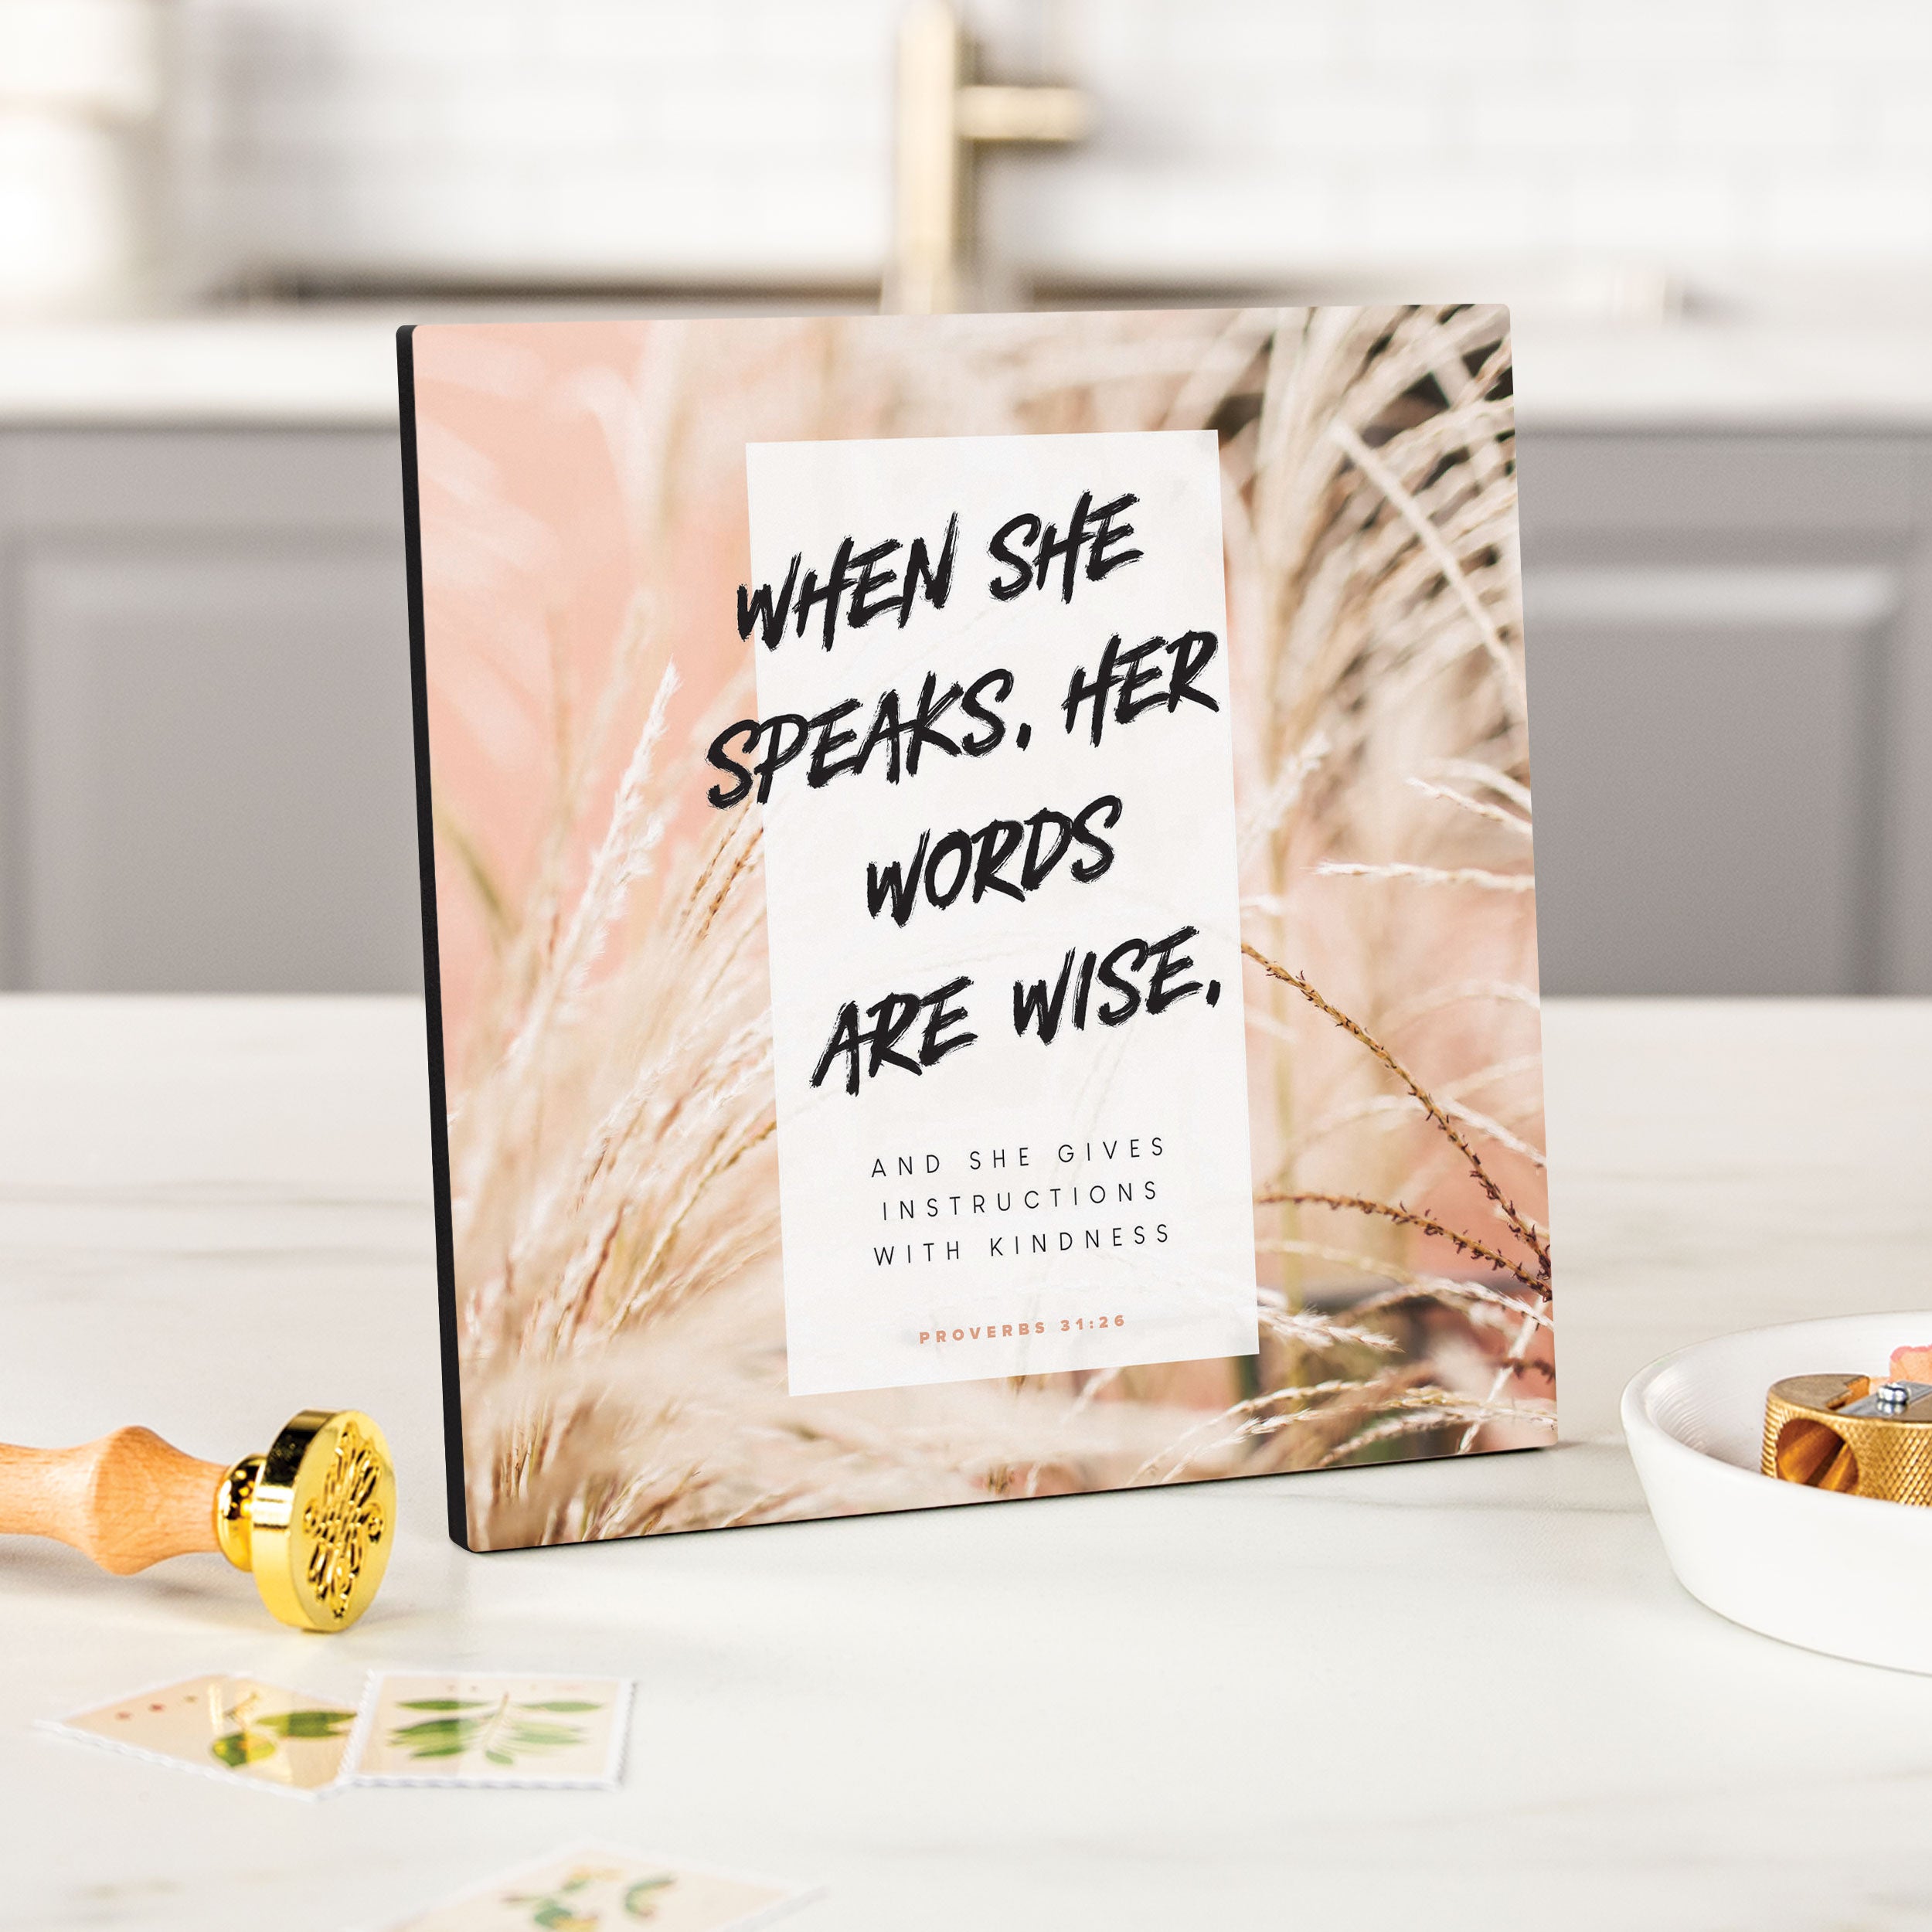 When She Speaks Her Words Are Wise Tabletop Sign